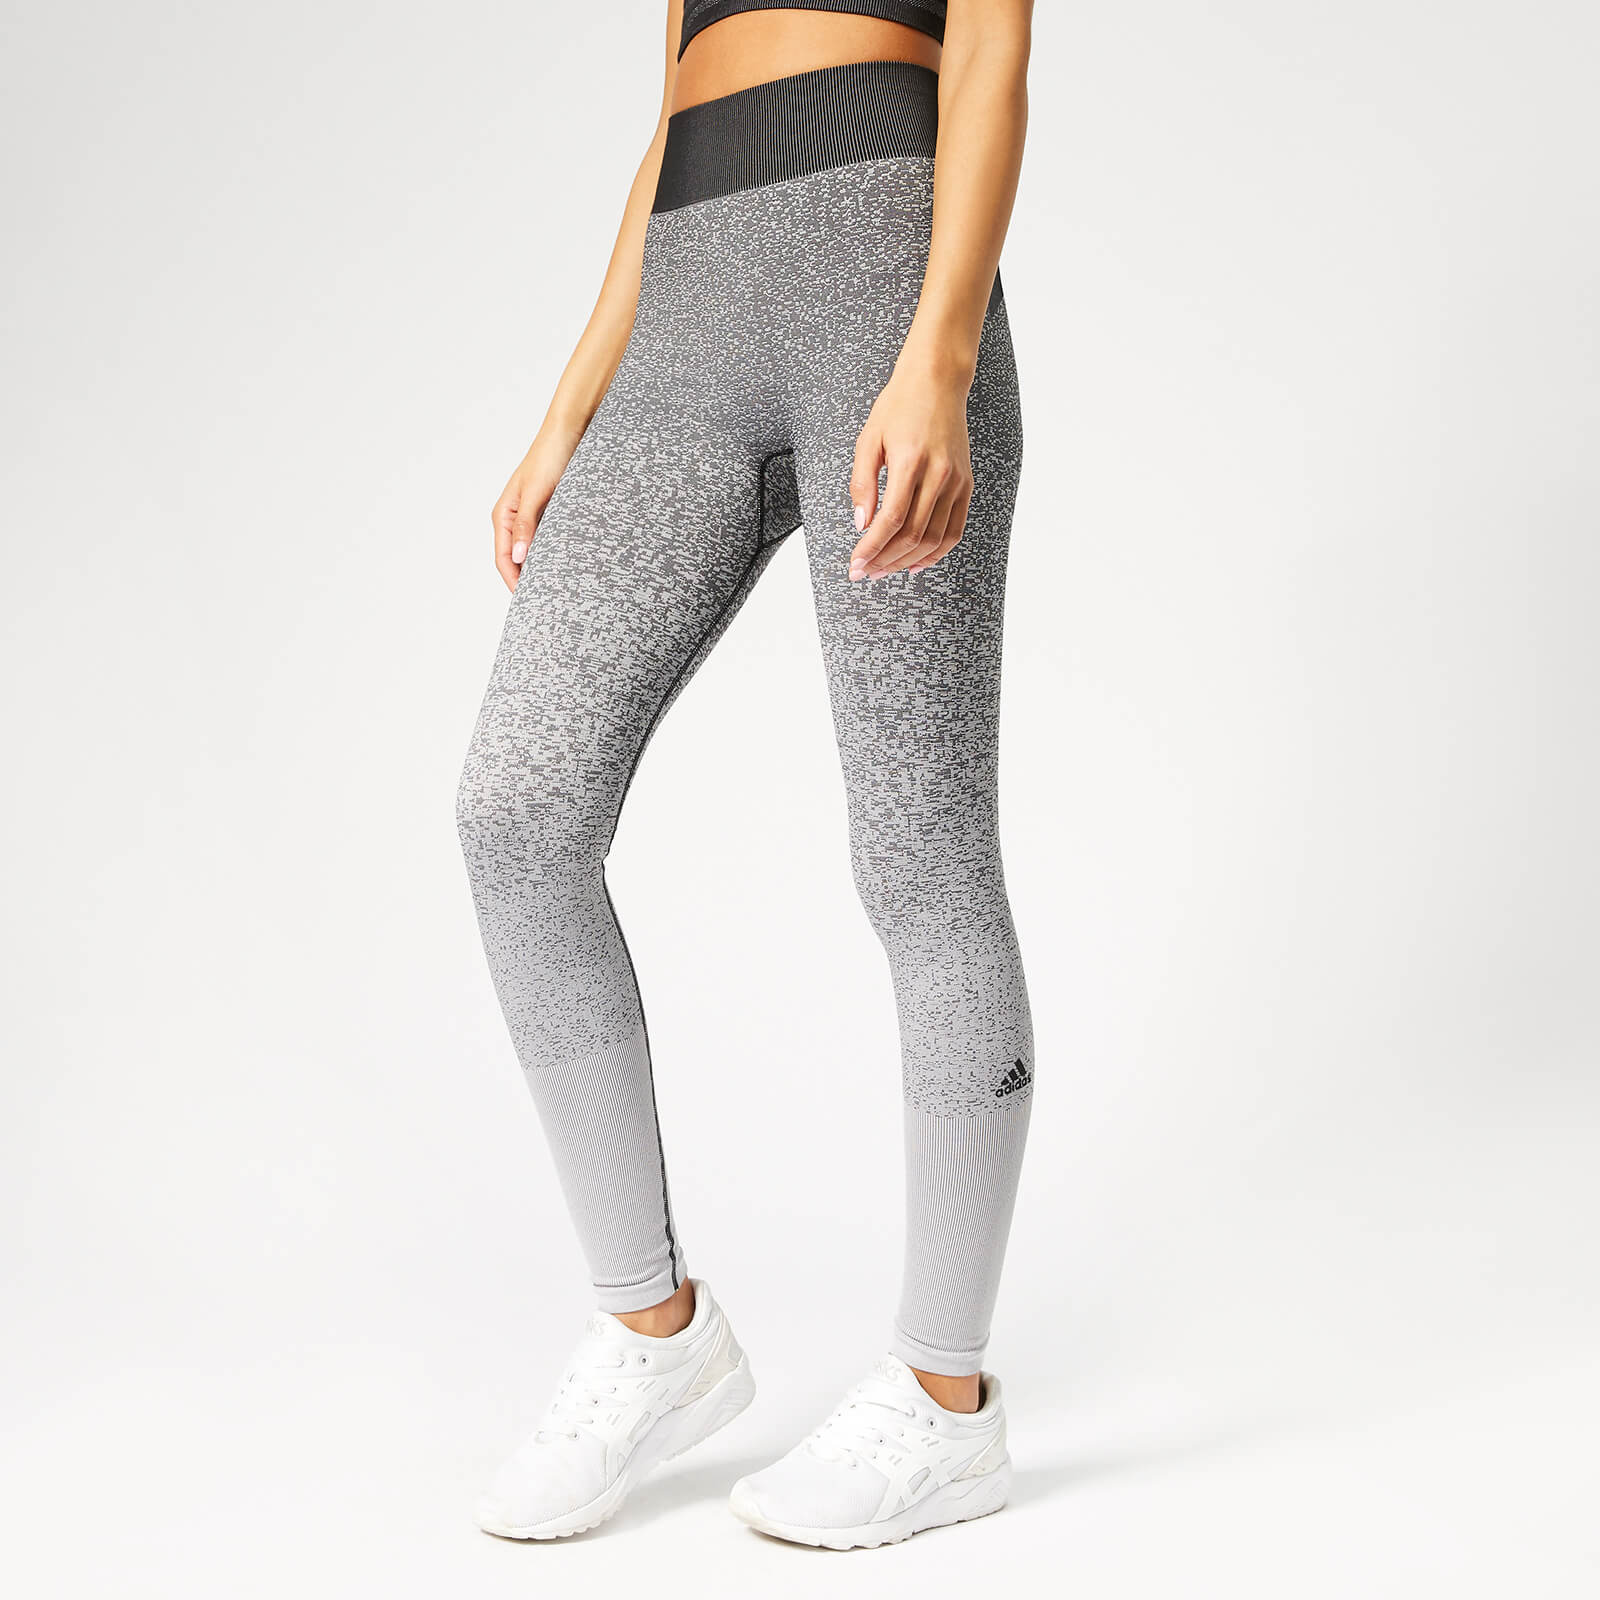 adidas believe this primeknit flw tights